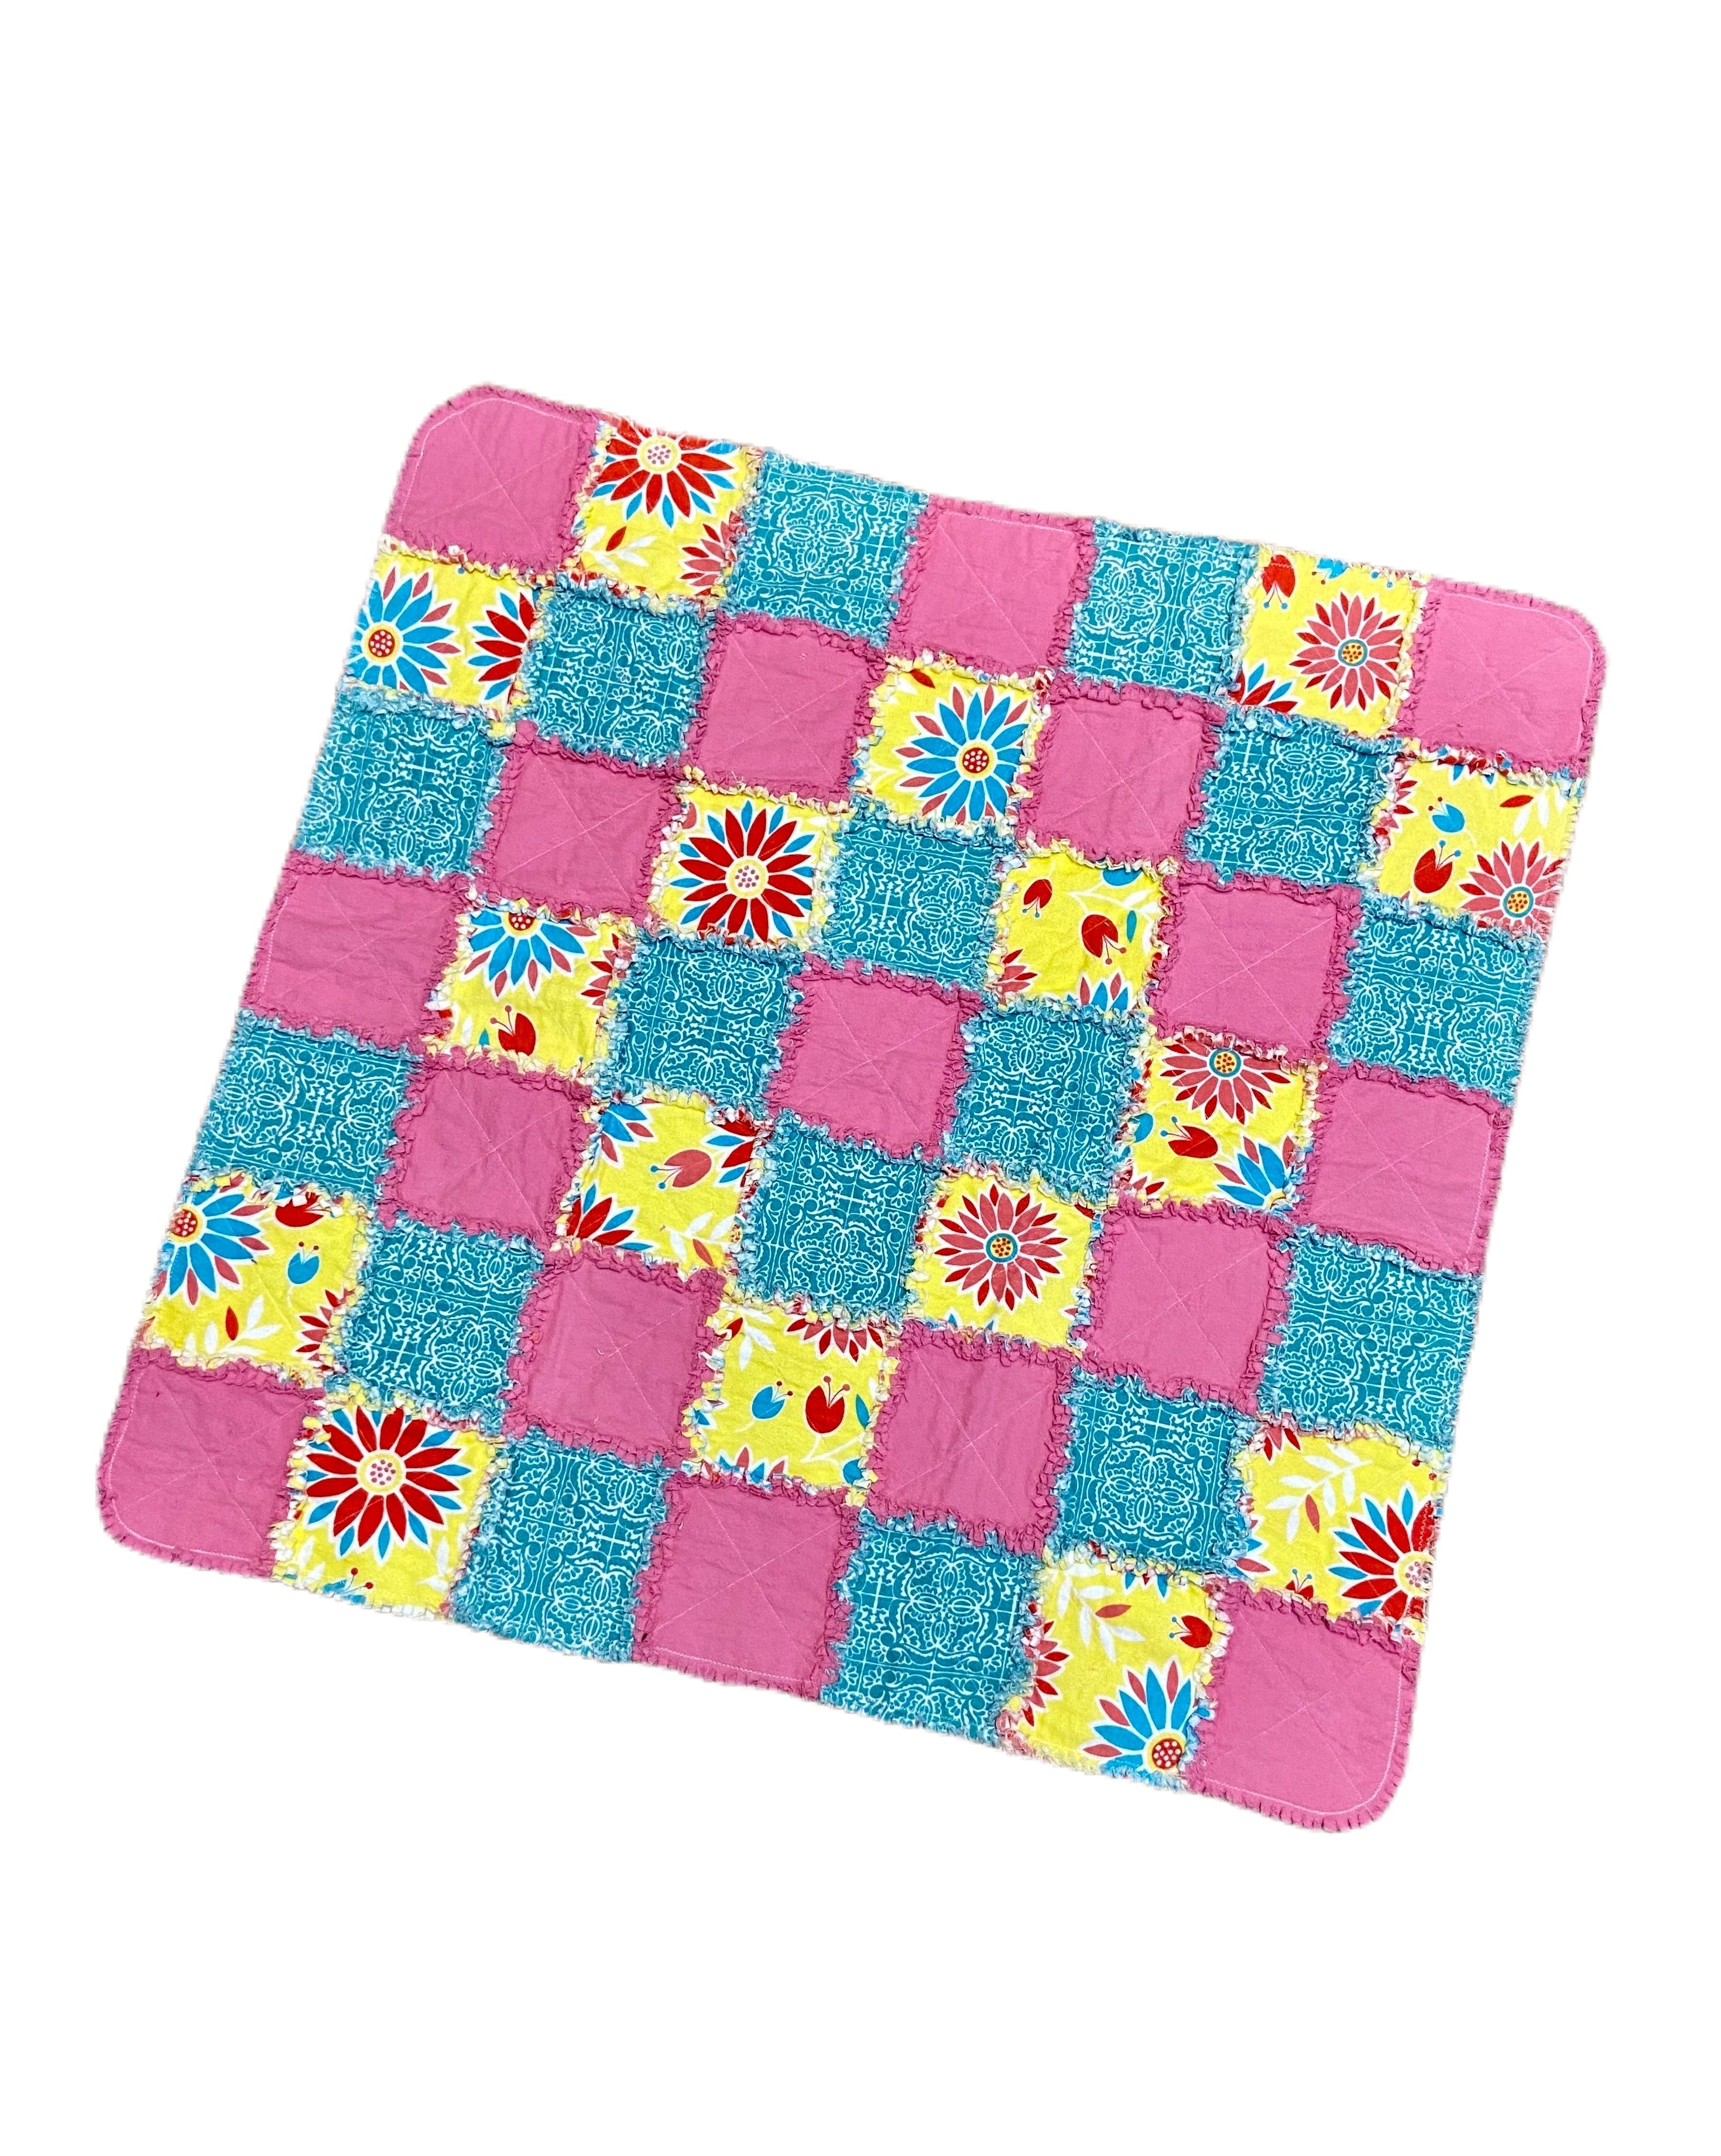 Pink and Teal Floral Cotton Rag Quilt